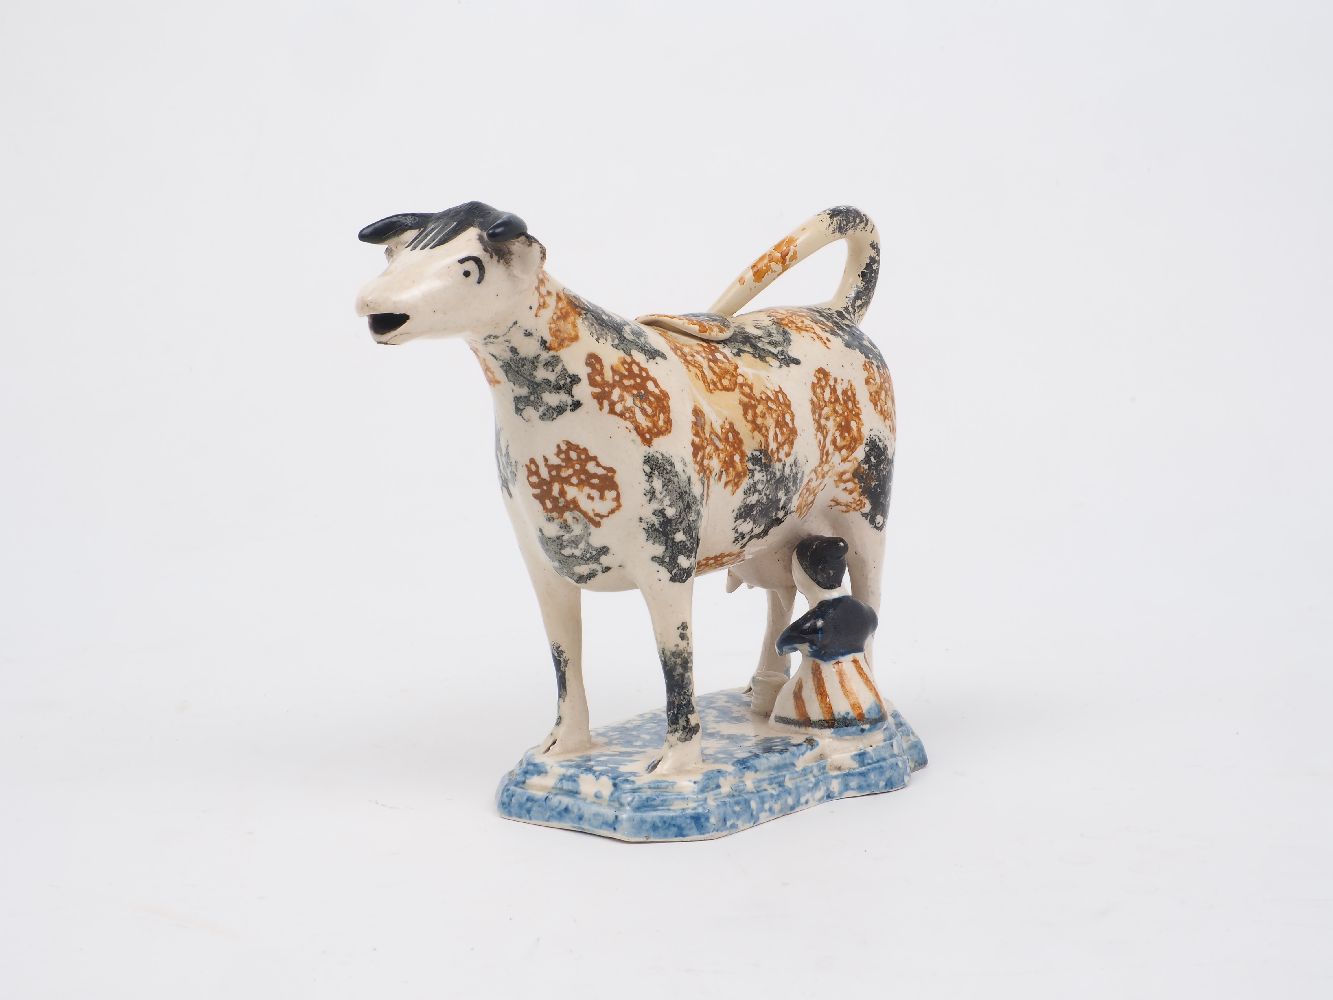 A Staffordshire pearlware cow creamer, late 18th/early 19th century, designed with a milkmaid and